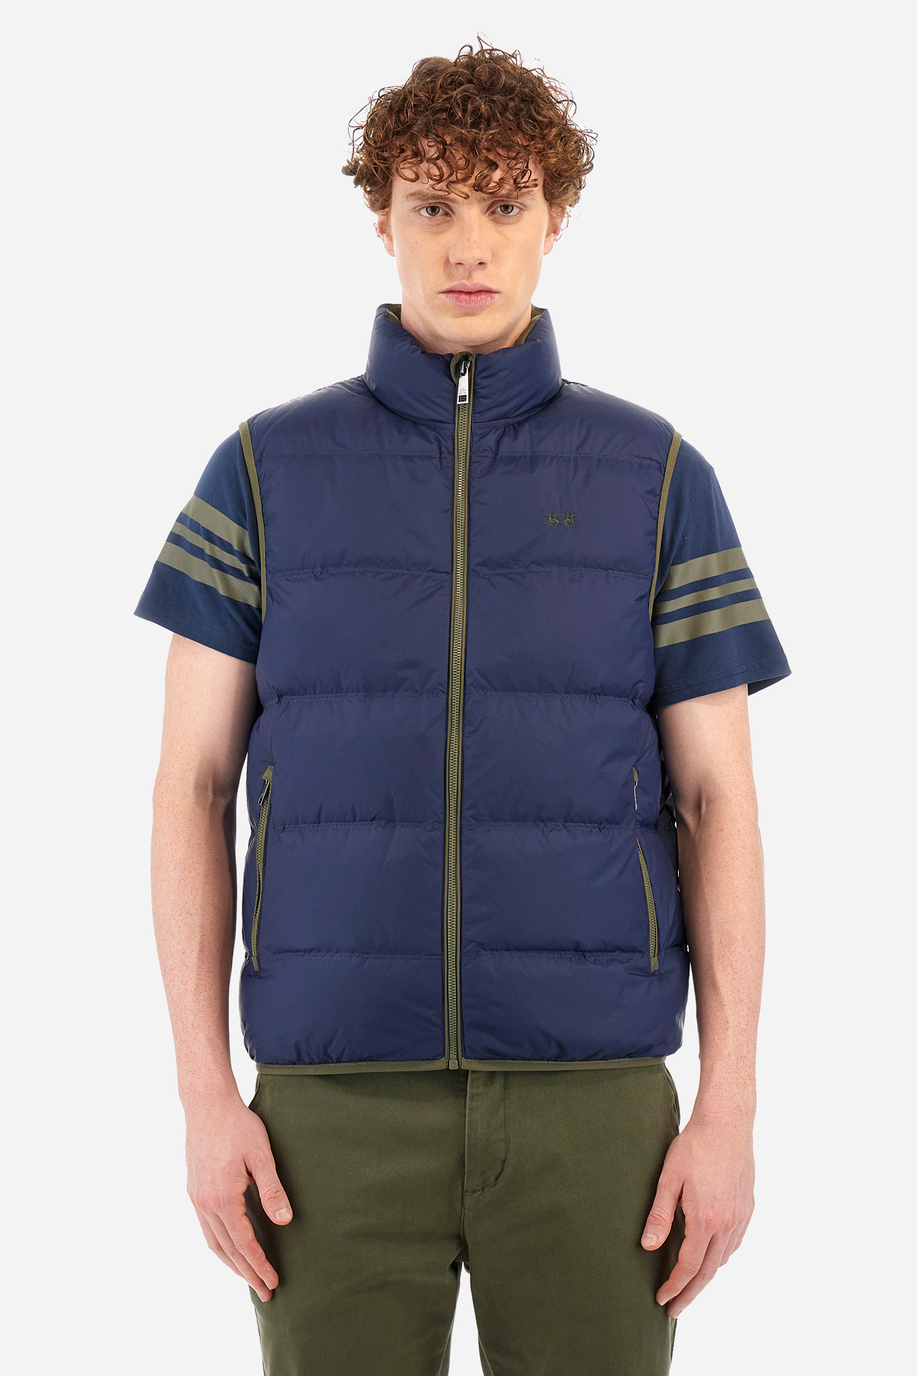 Man gilet in regular fit - Winniefred - Outerwear and Jackets | La Martina - Official Online Shop